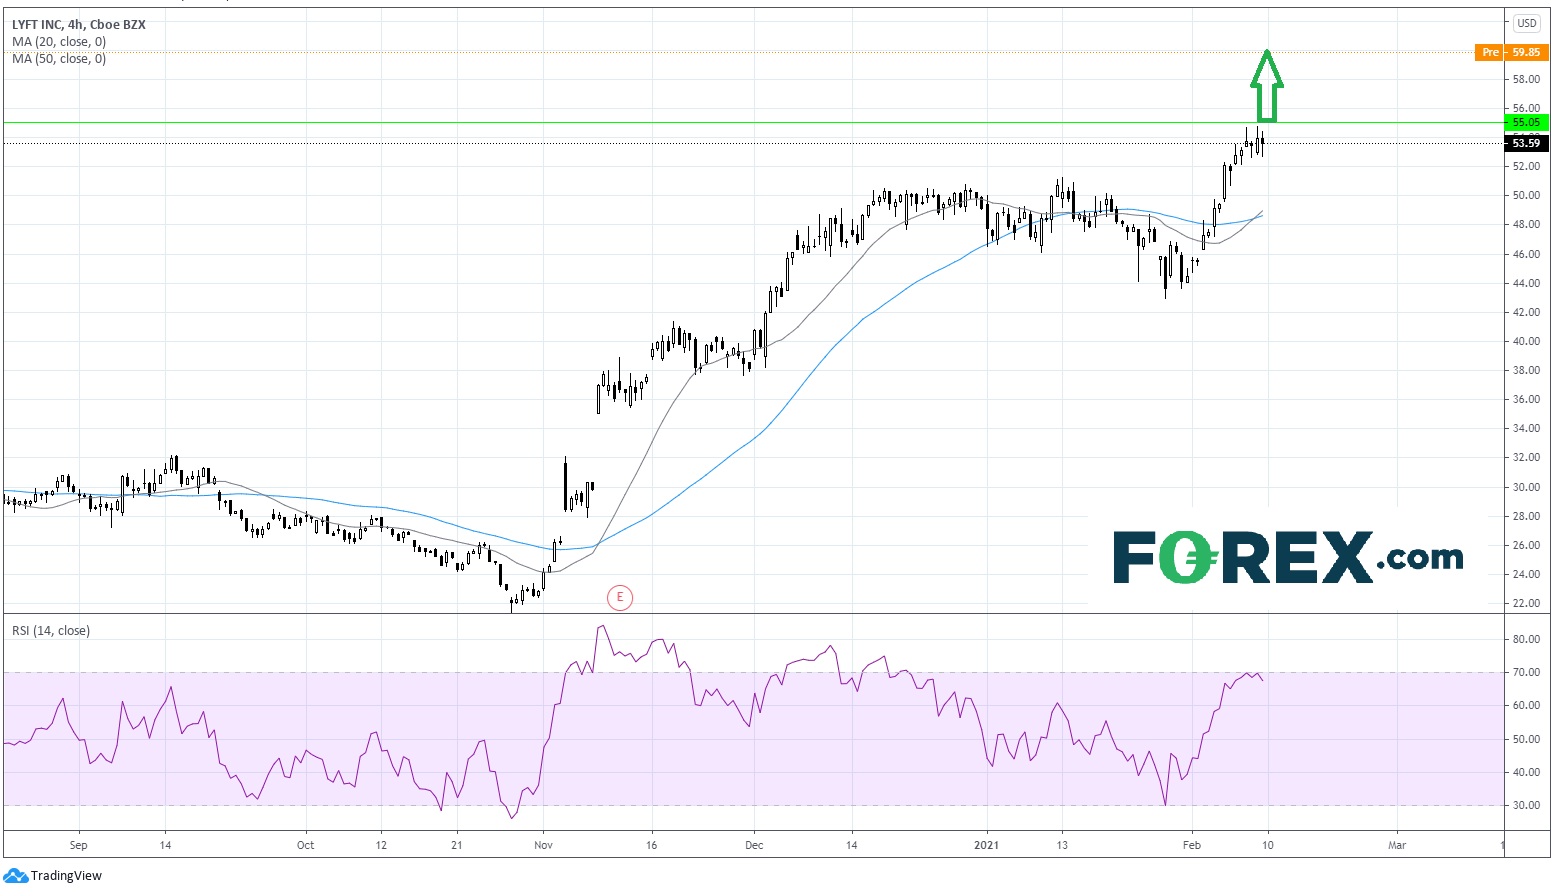 Chart analysis of Lyft stock performance. Published in February 2021 by FOREX.com